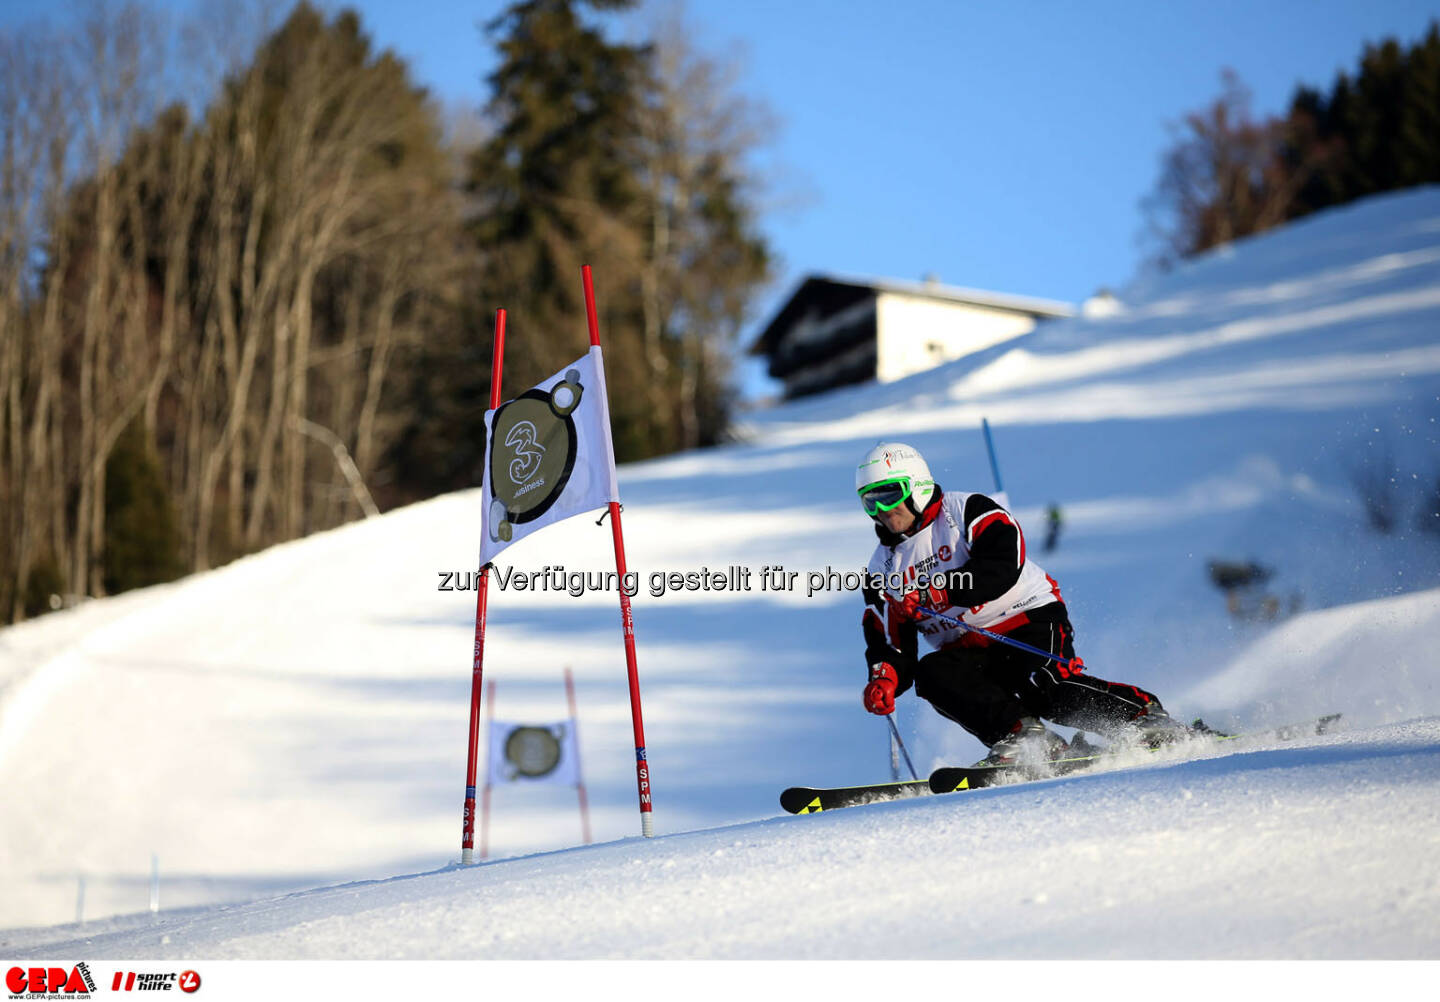 Ski for Gold Charity Race. Image shows Andy Lee Lang. Photo: GEPA pictures/ Daniel Goetzhaber